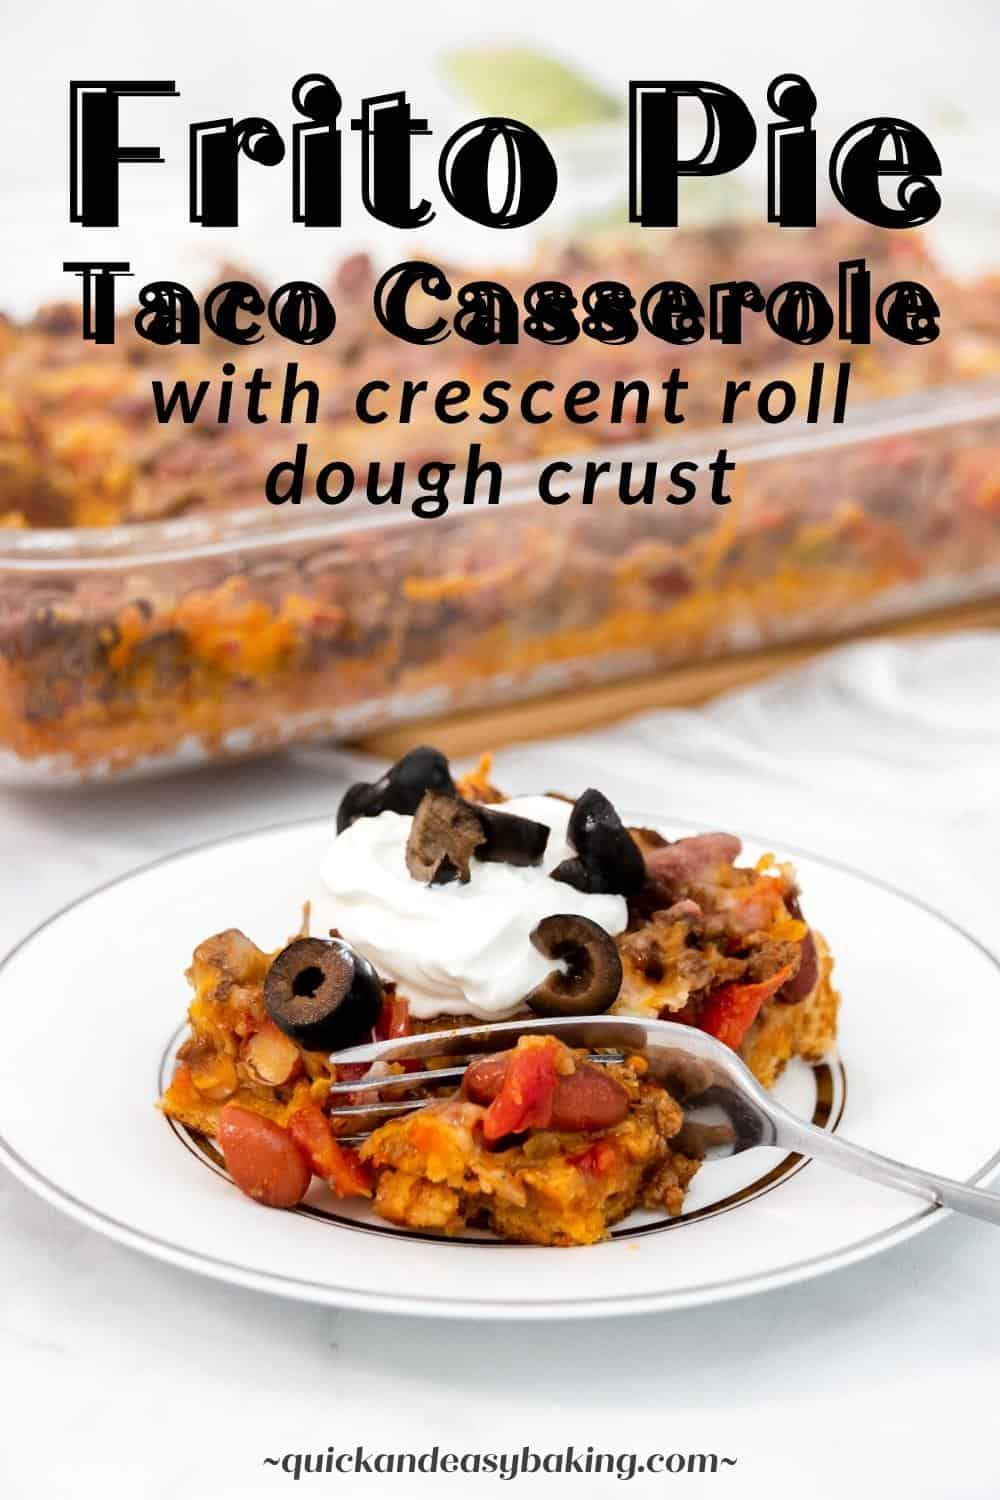 Pin image with slice of frito casserole and text overlay.